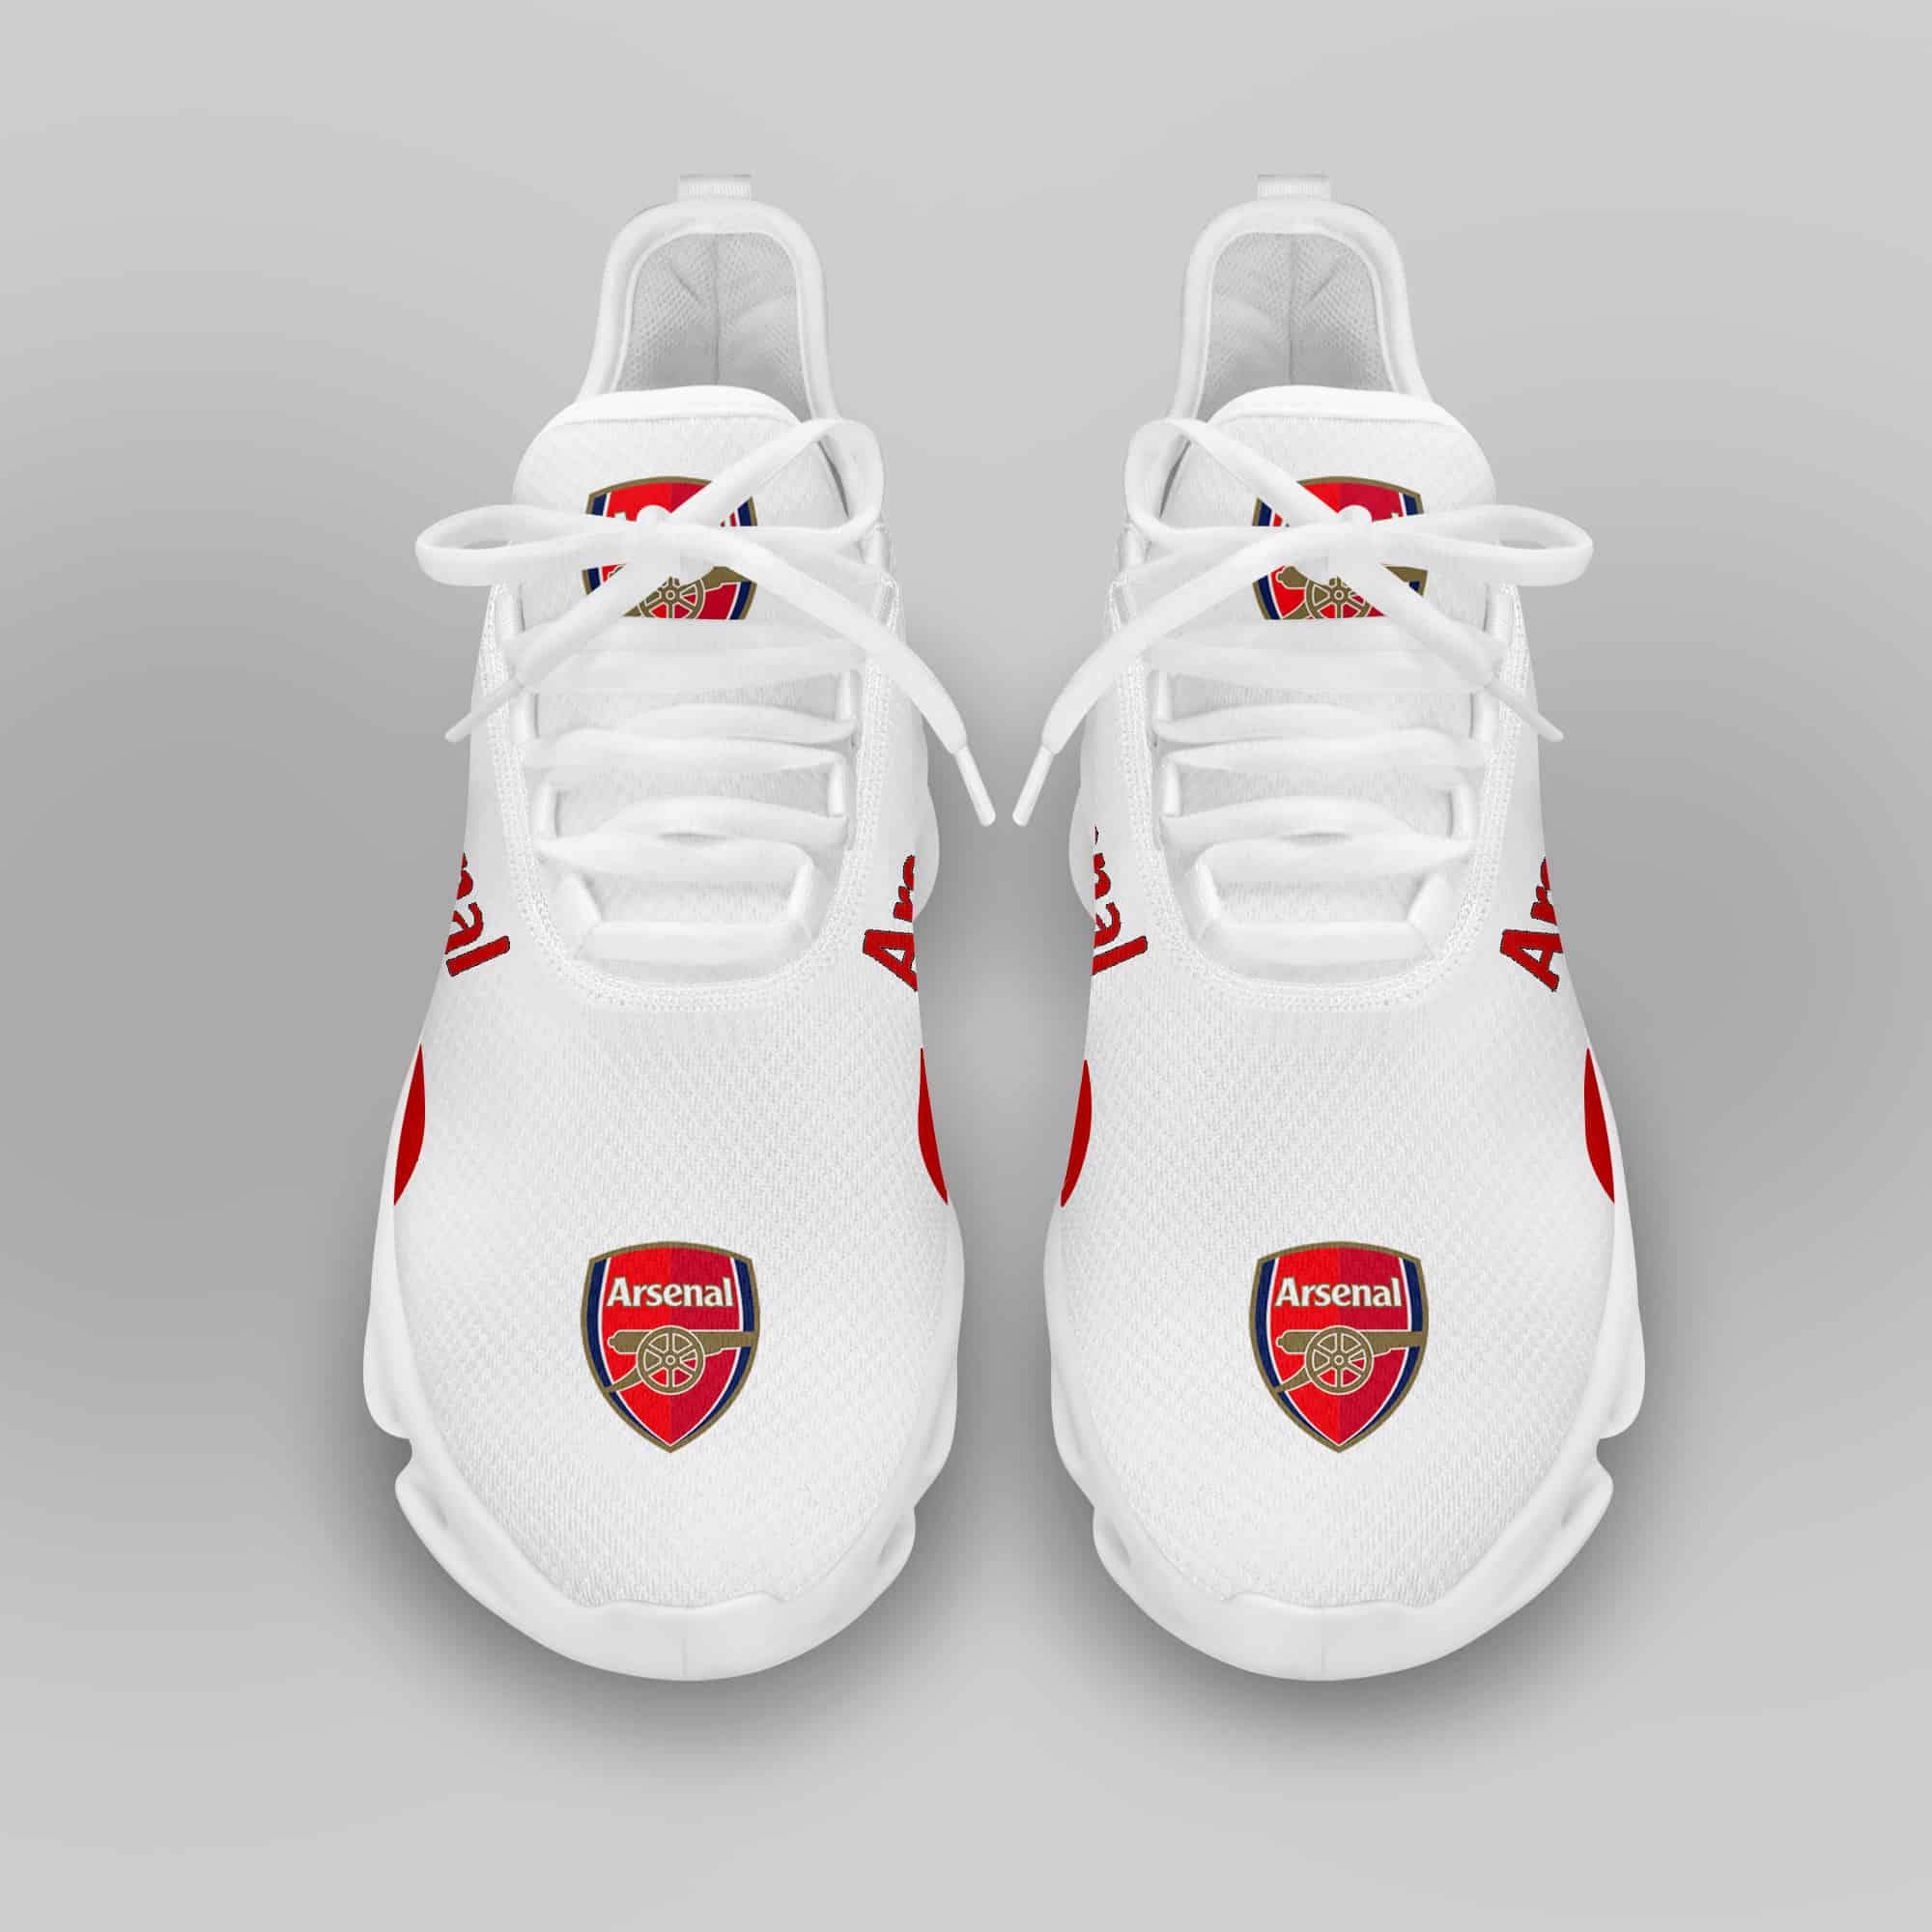 Arsenal Running Shoes Max Soul Shoes Sneakers Ver 2 3